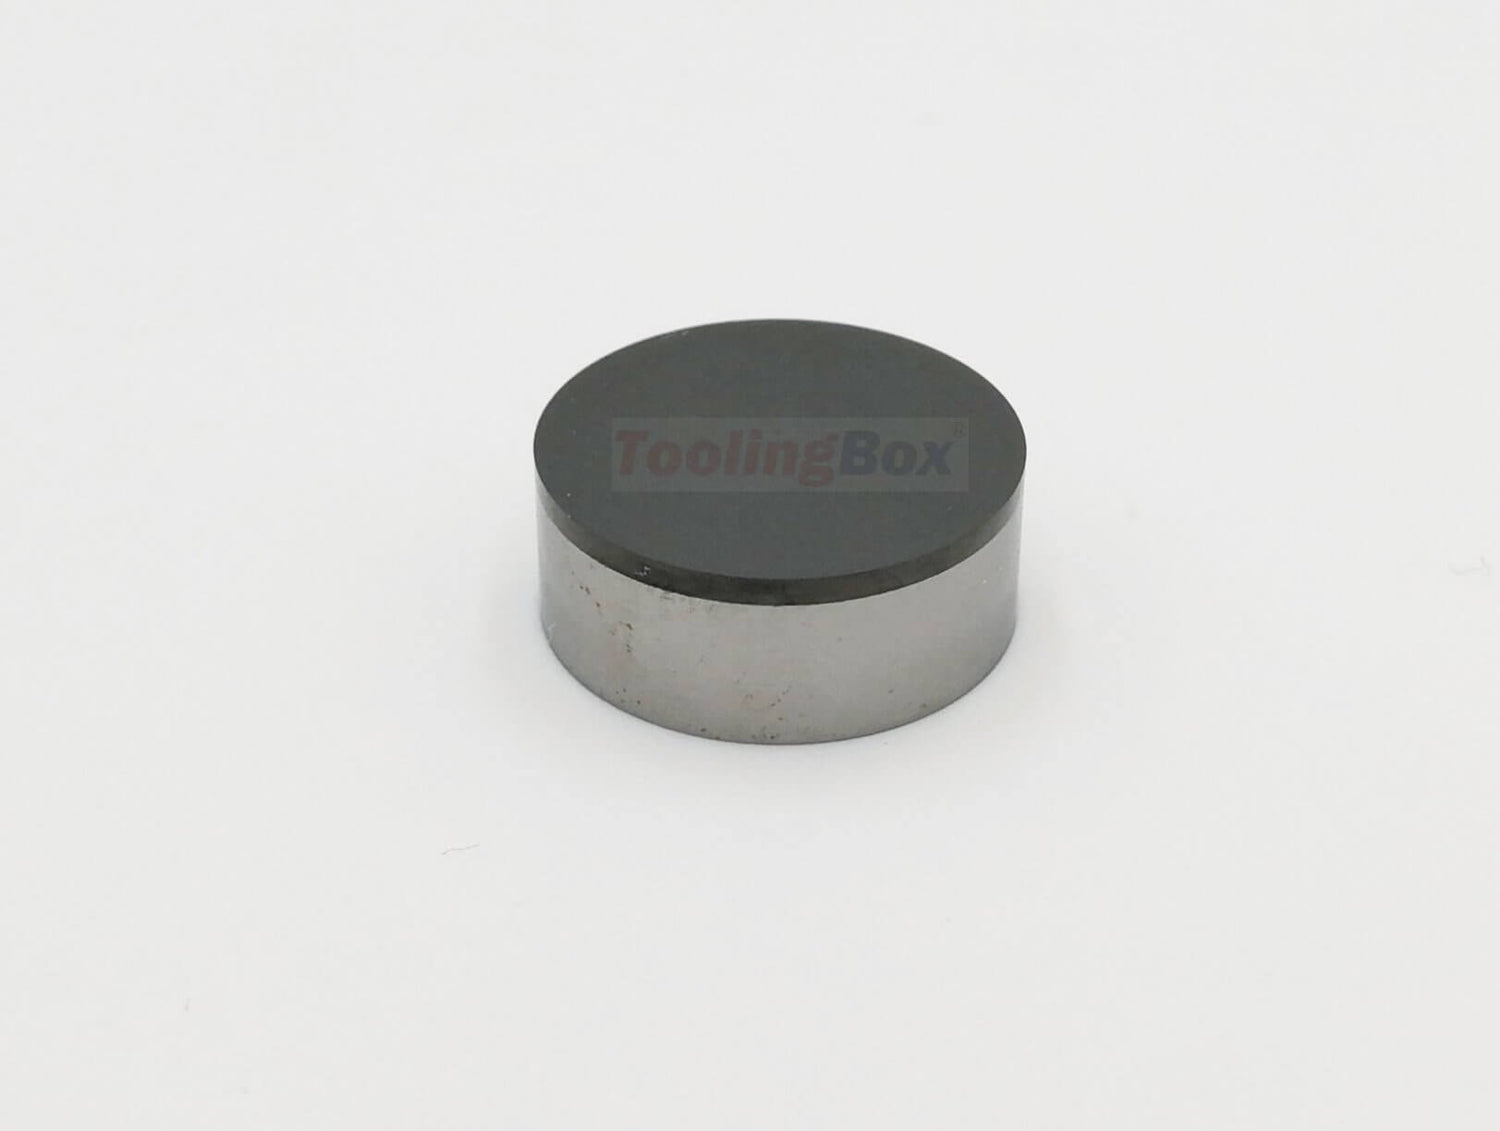 Laminated CBN Insert Dia 12.7mm(1/2 inch) for Aluminum Heads & Blocks with steel precups